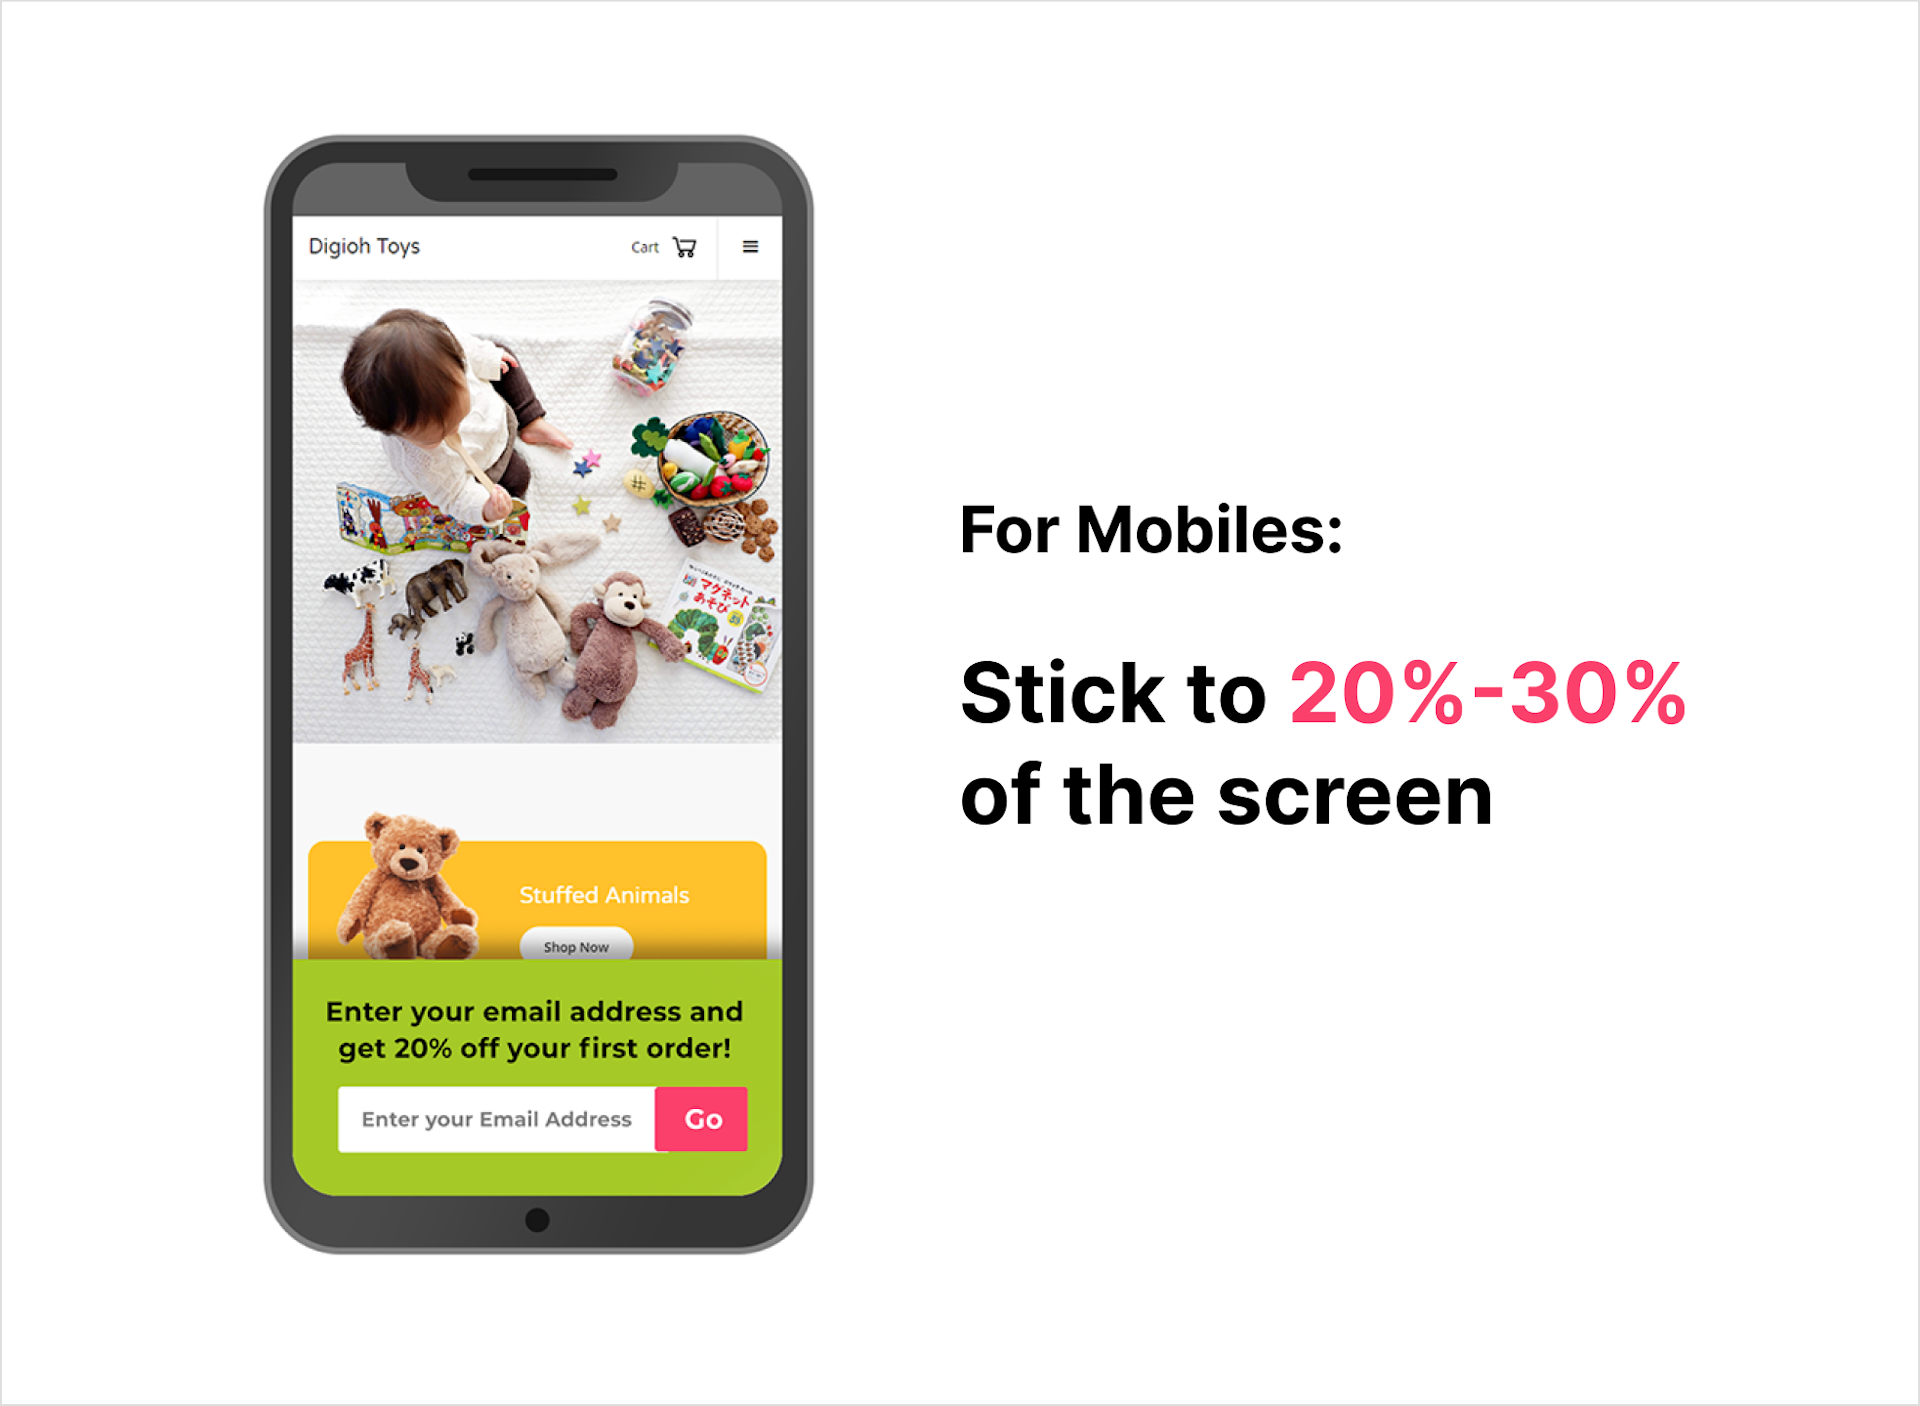 For mobiles: stick to 20%-30% of the screen